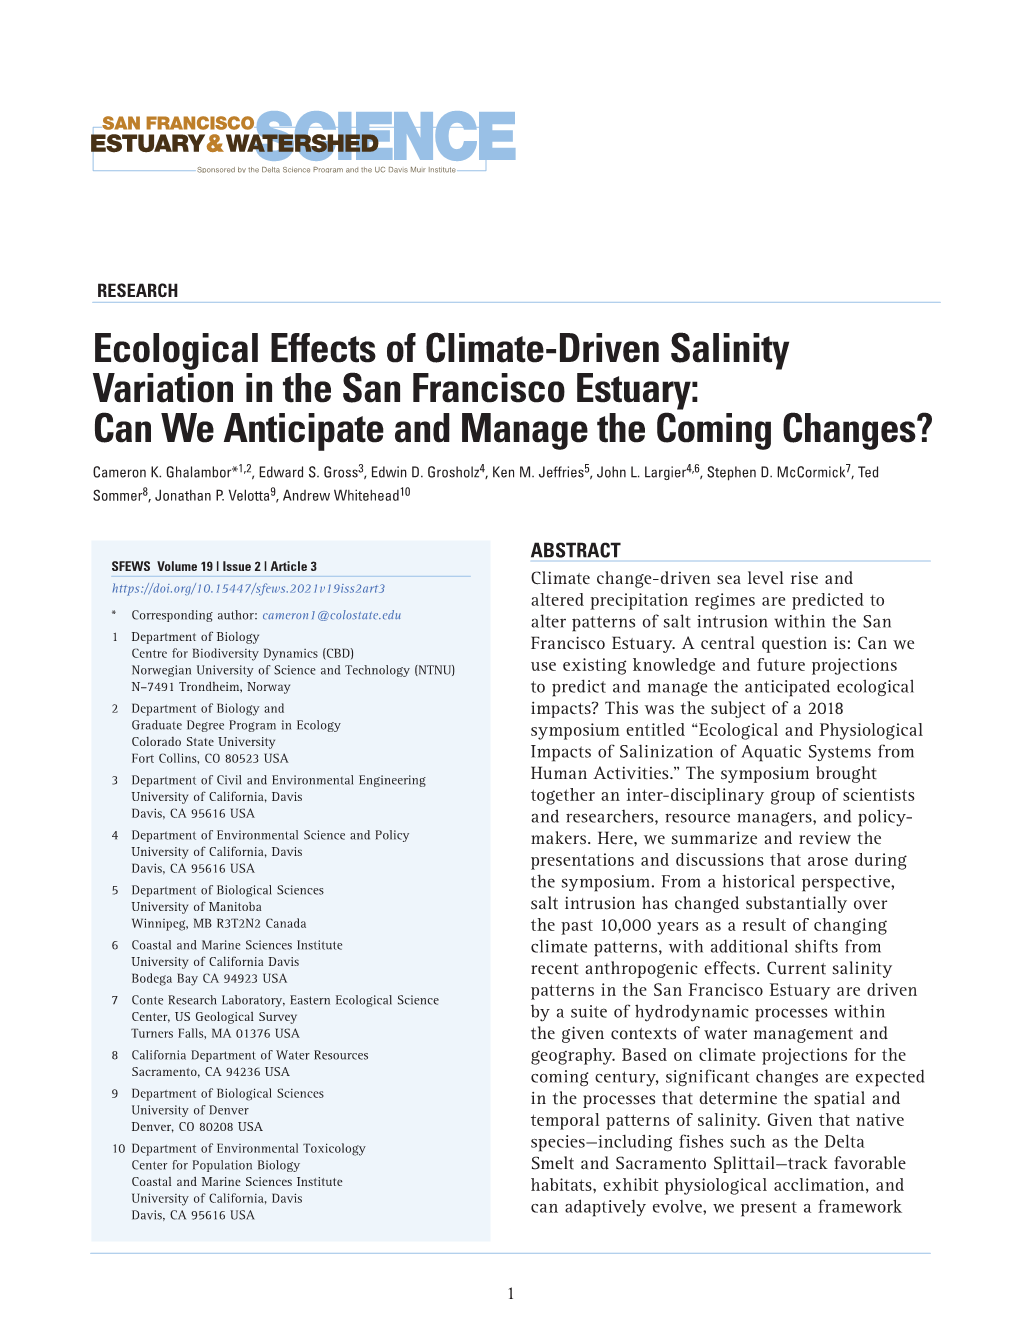 Ecological Effects of Climate-Driven Salinity Variation in the San Francisco Estuary: Can We Anticipate and Manage the Coming Changes? Cameron K